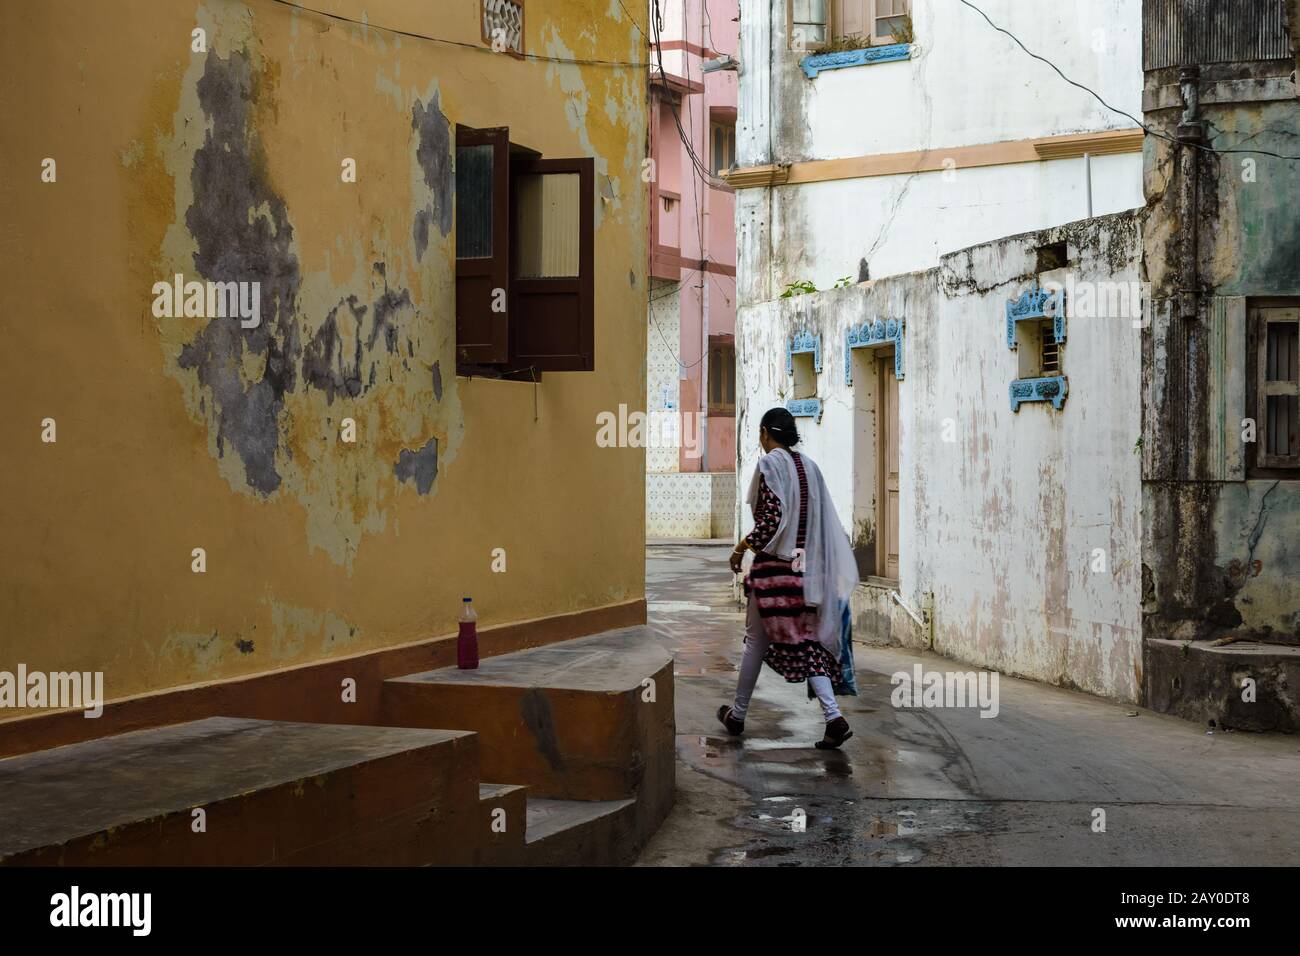 Diu, India - December 2018: A woman walks in the quiet, narrow streets of the town of Diu. Stock Photo